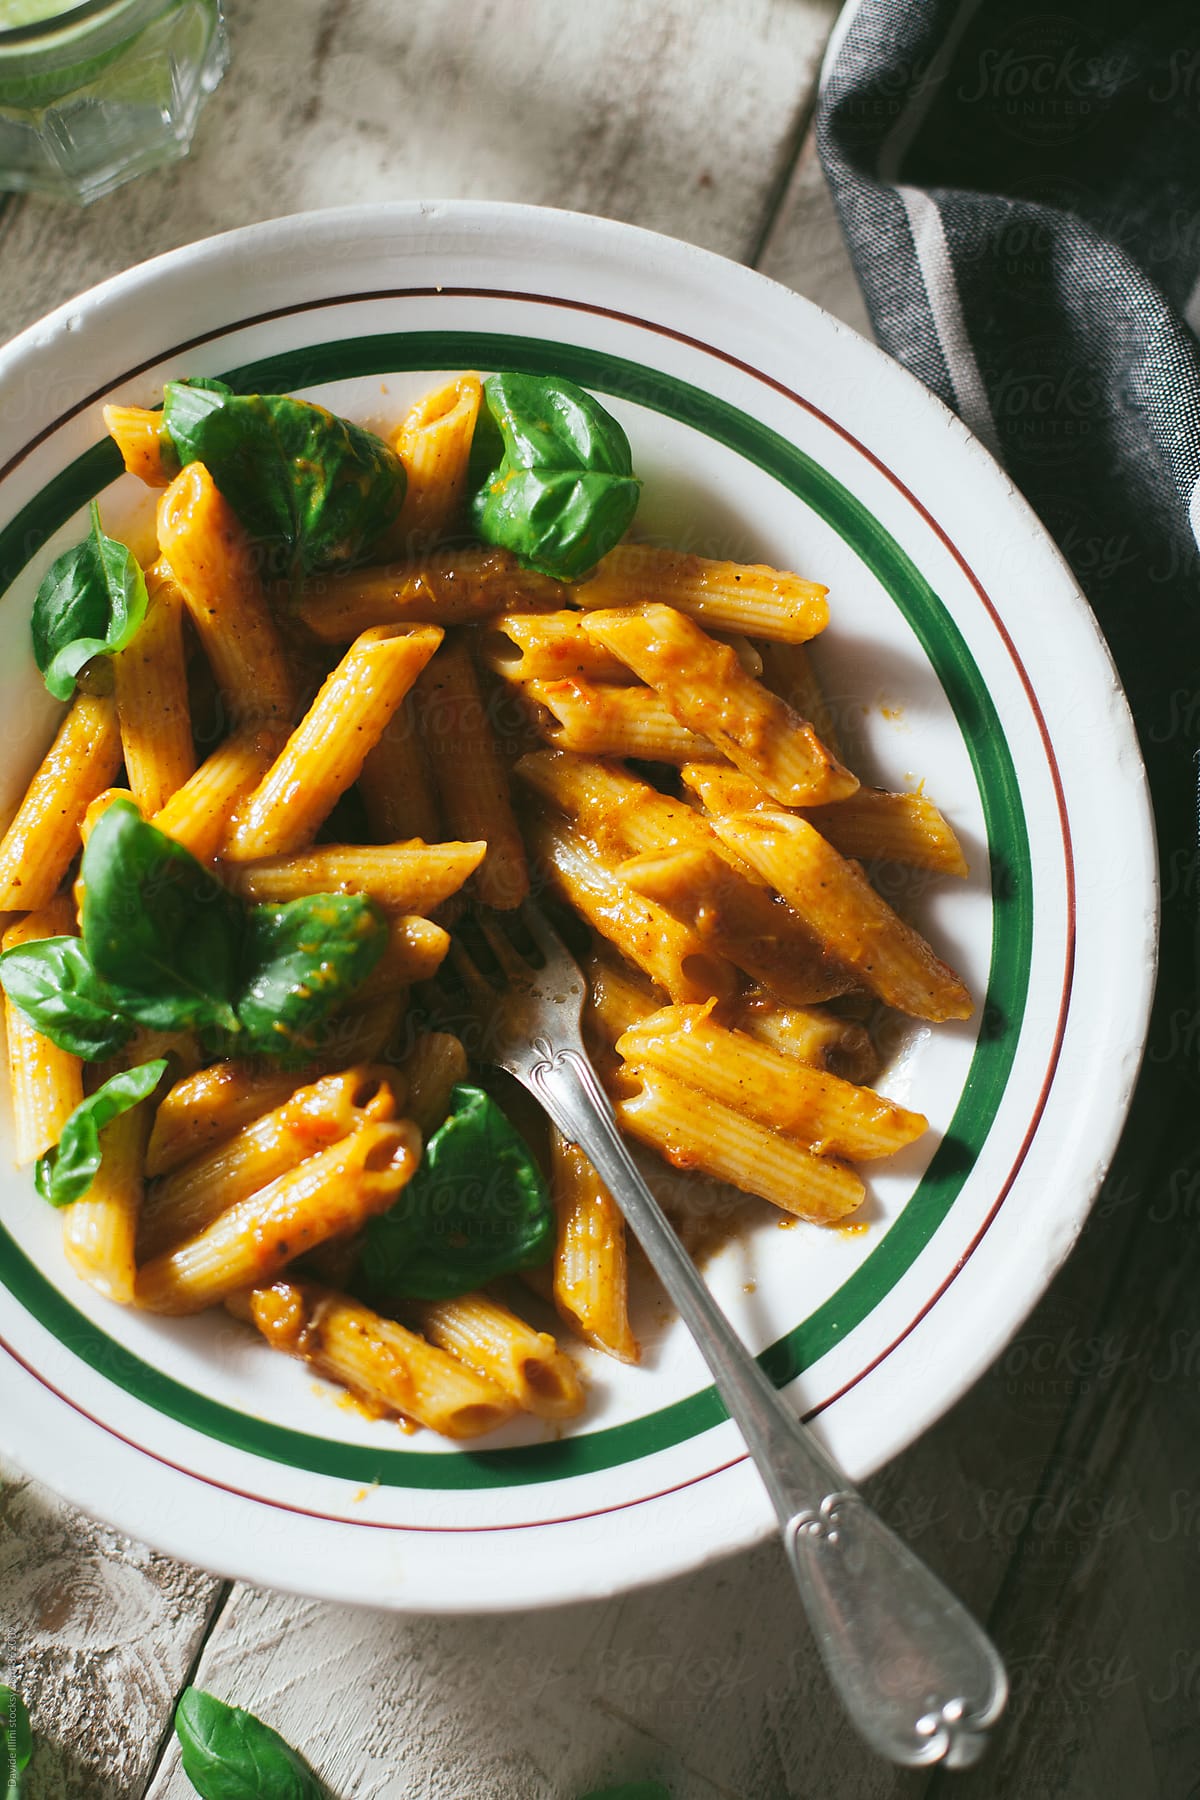 Pasta with pepper sauce and basil